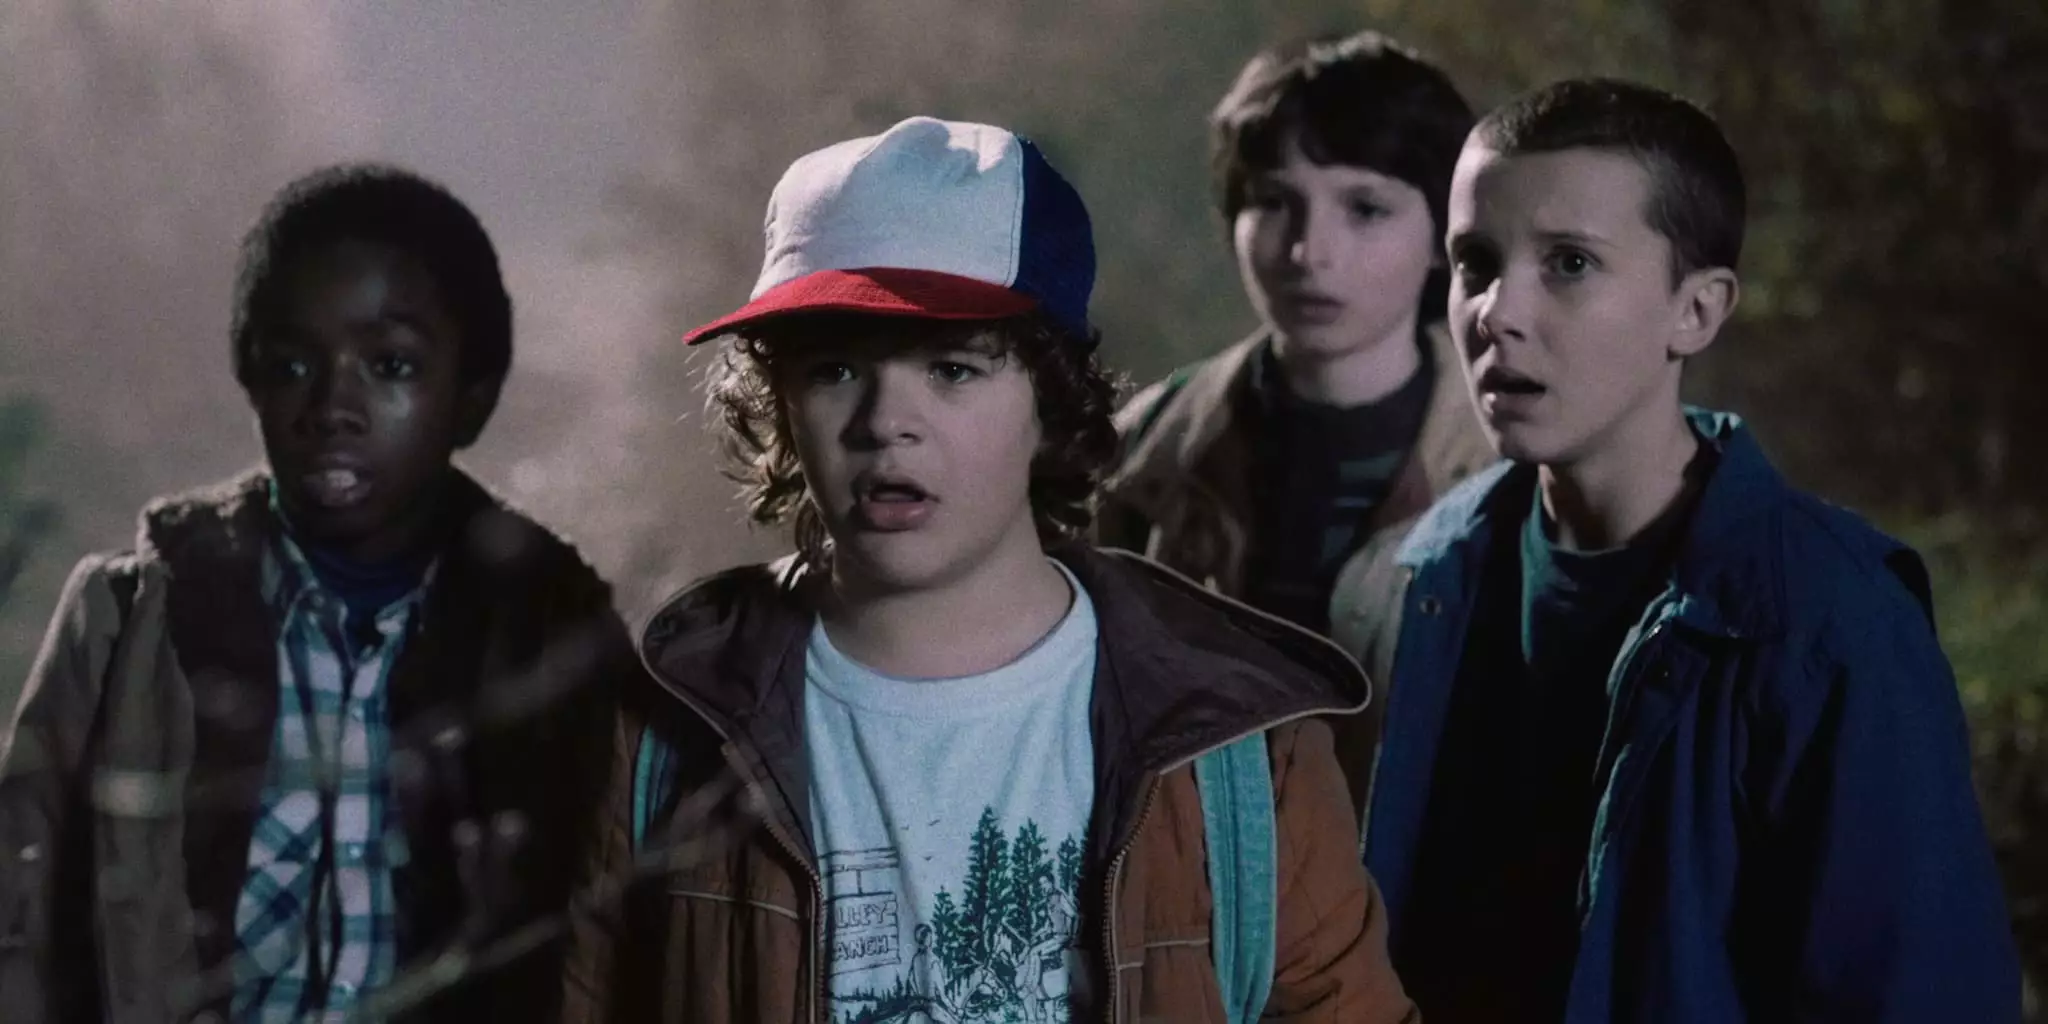 Netflix Has Got Some 1980s Royalty Signed Up For The Next Series Of 'Stranger Things' 